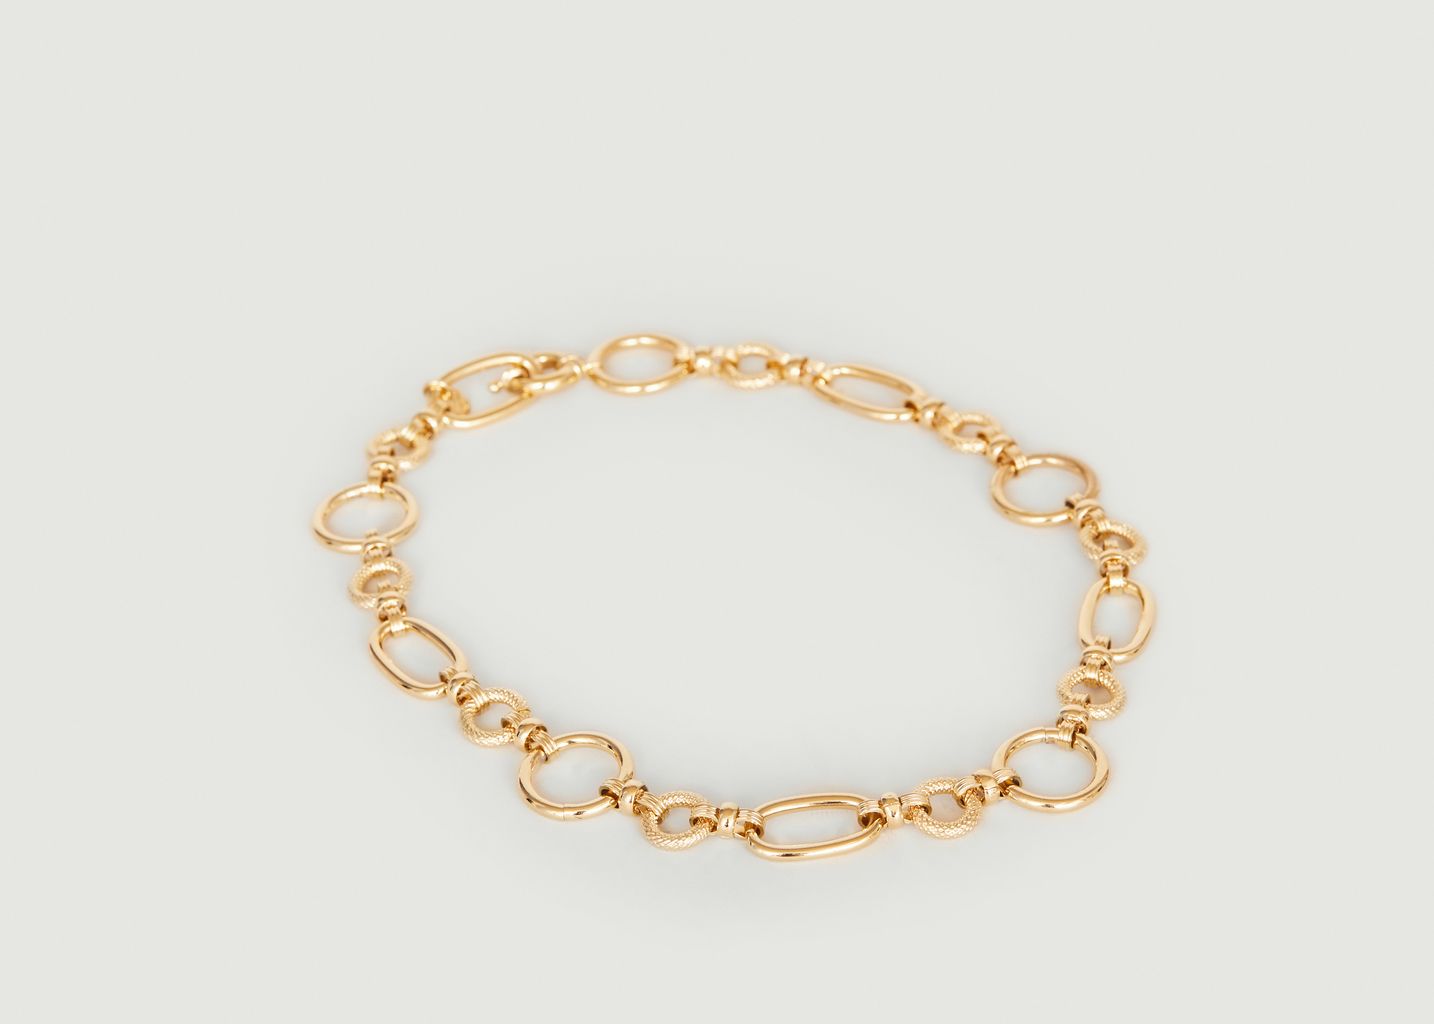 Charlotte chain necklace - Louise Damas